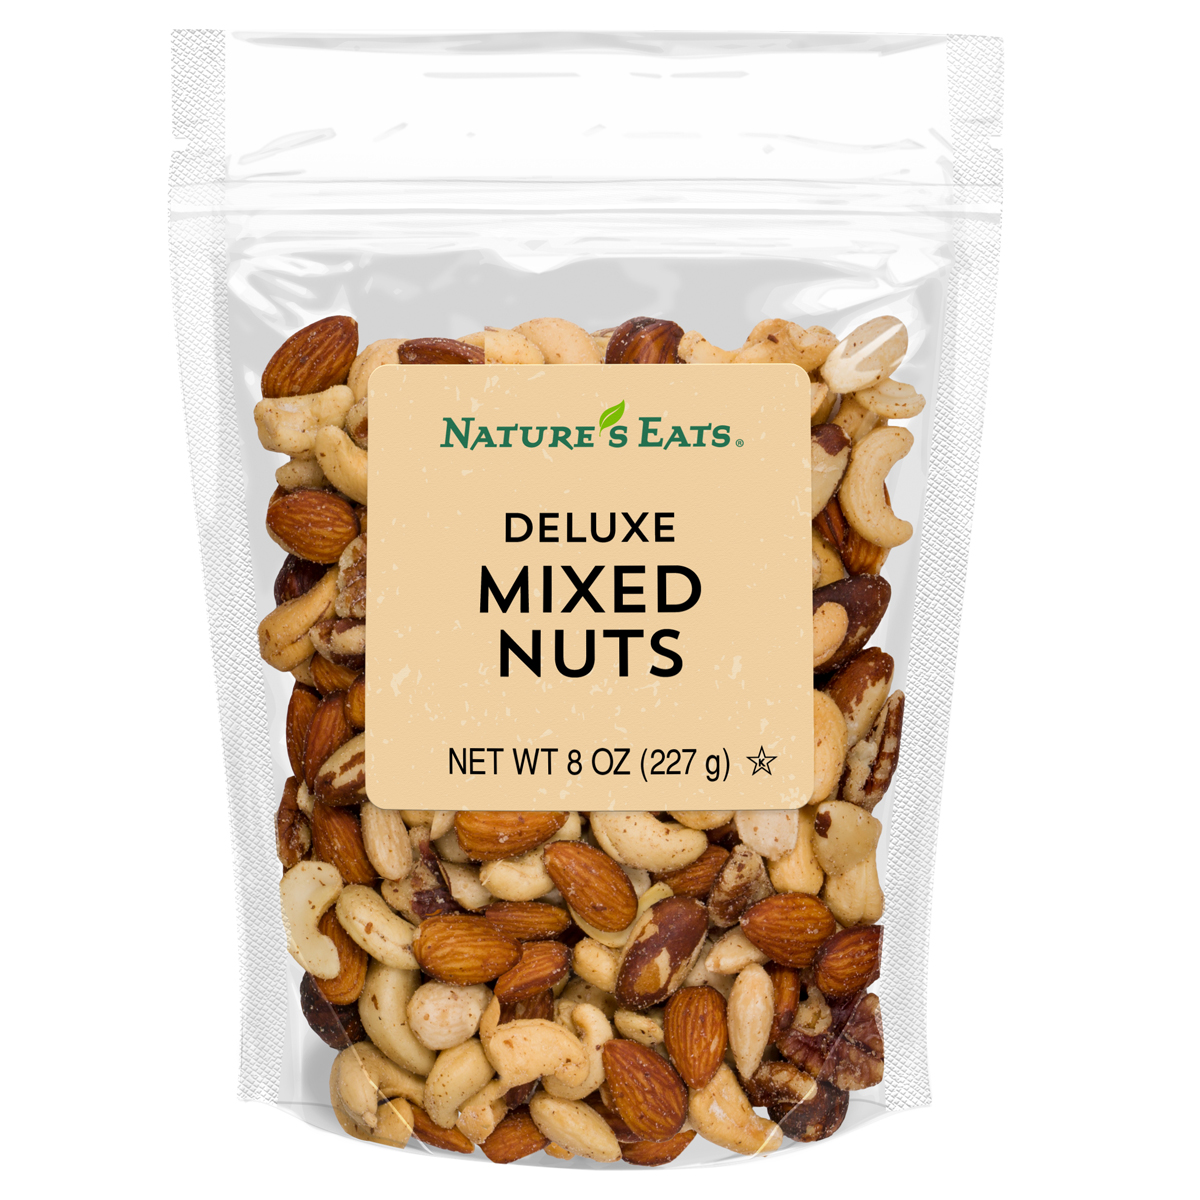 deluxe-mixed-nuts-nep-8oz.jpg